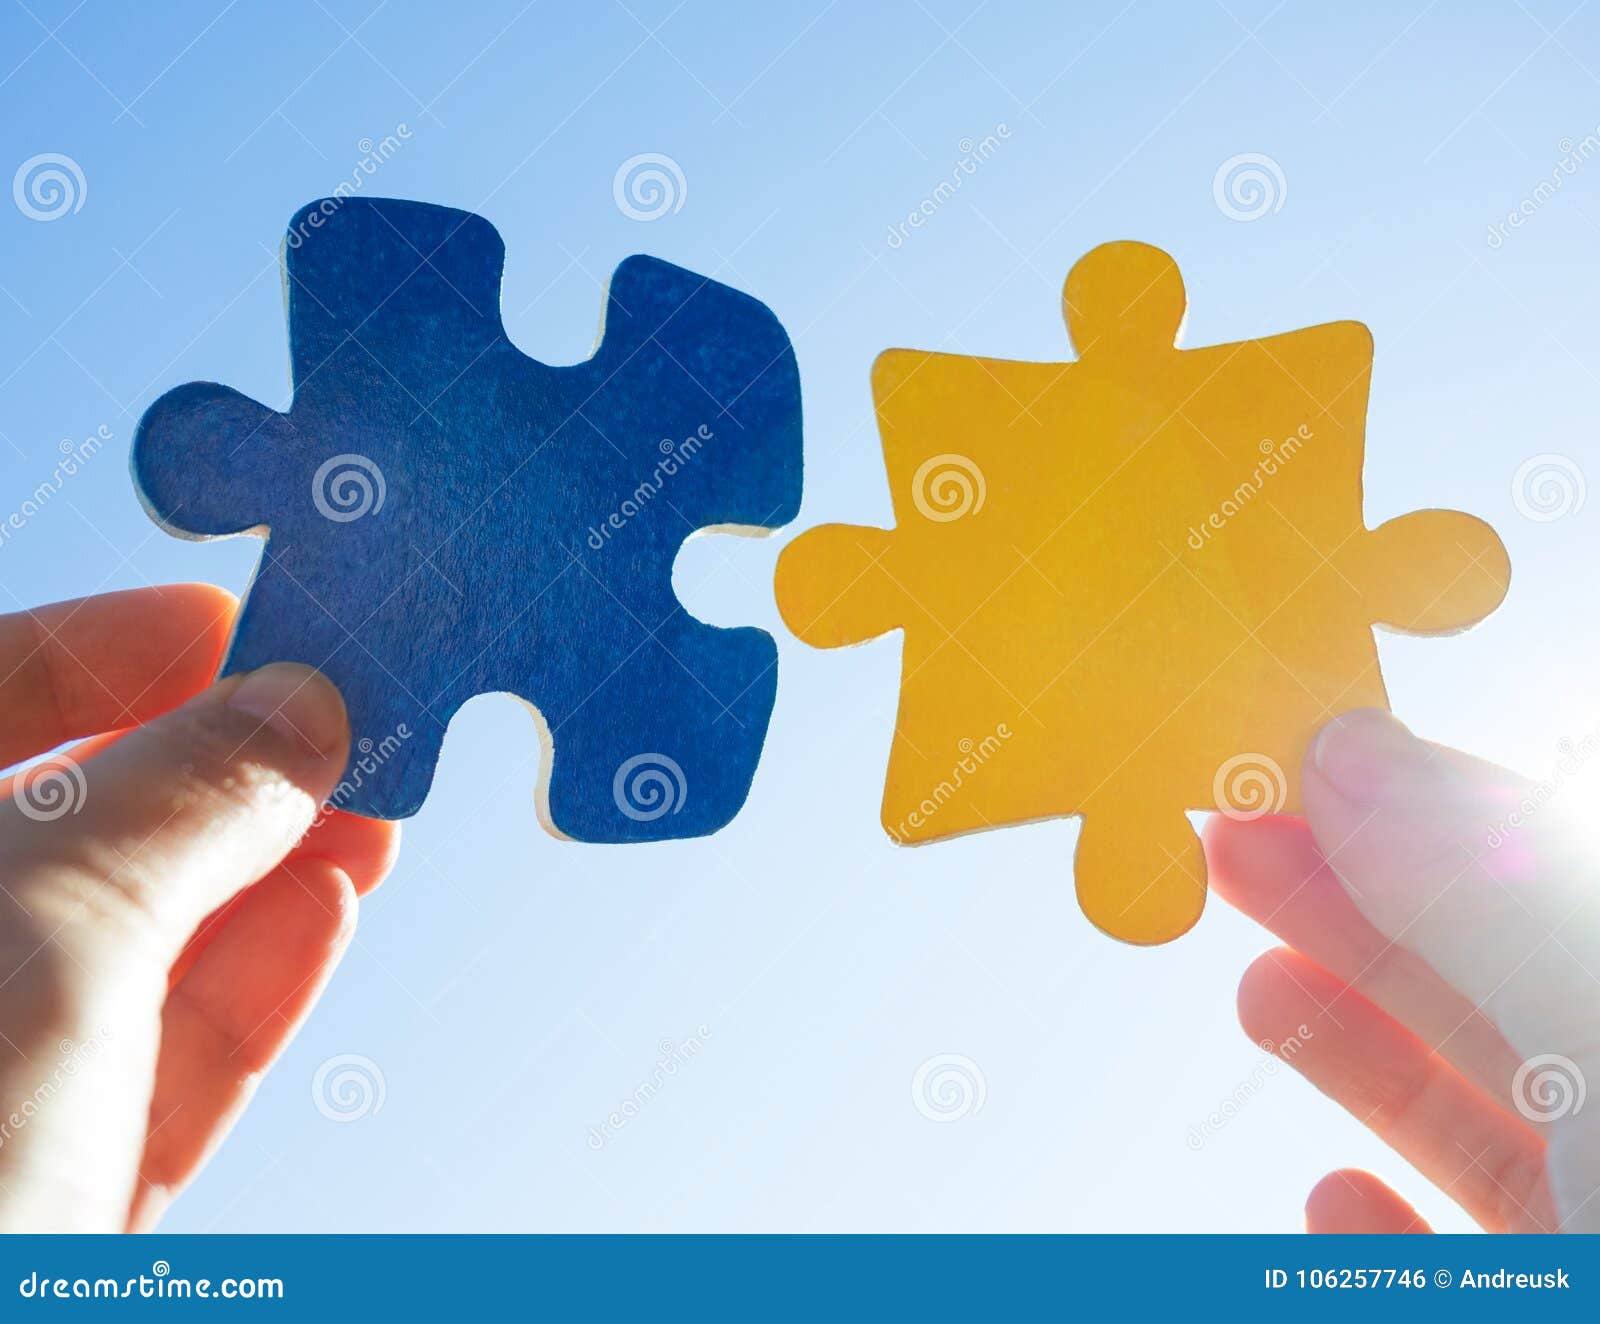 hands with puzzle pieces